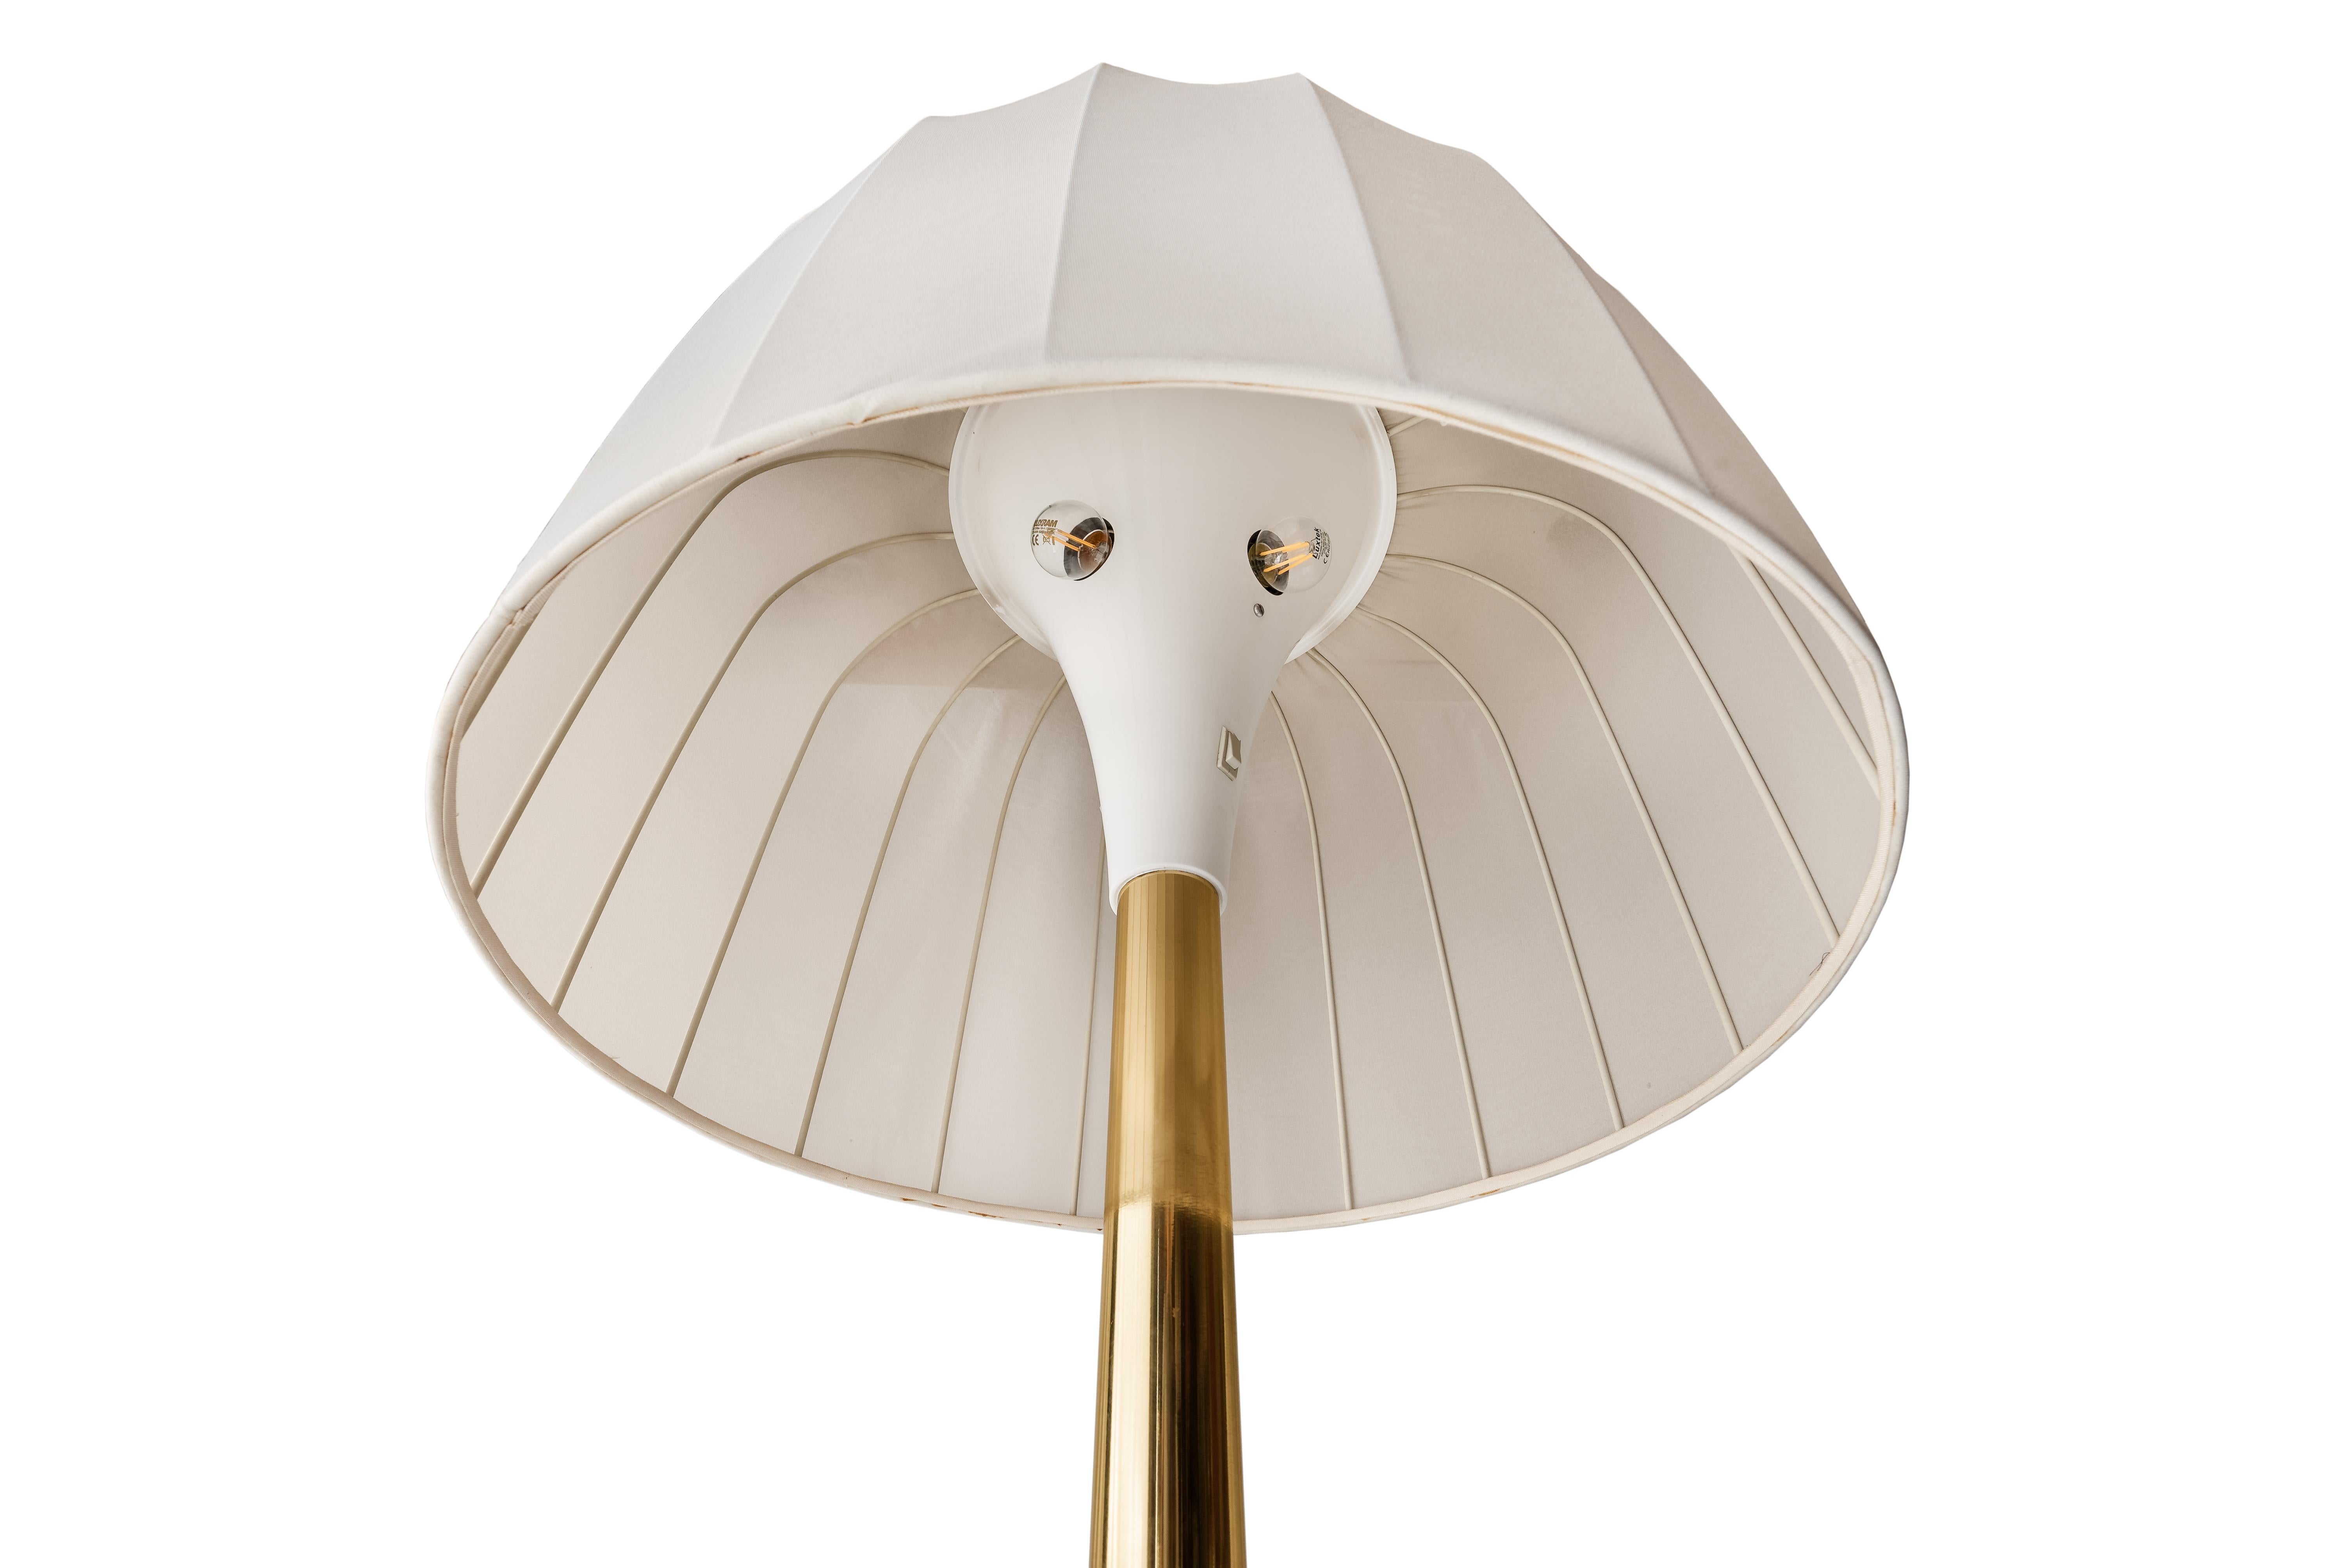 Lacquered Mid-Century Modern White and Brass Floor Lamp by Staff Leuchten, Germany, 1960s